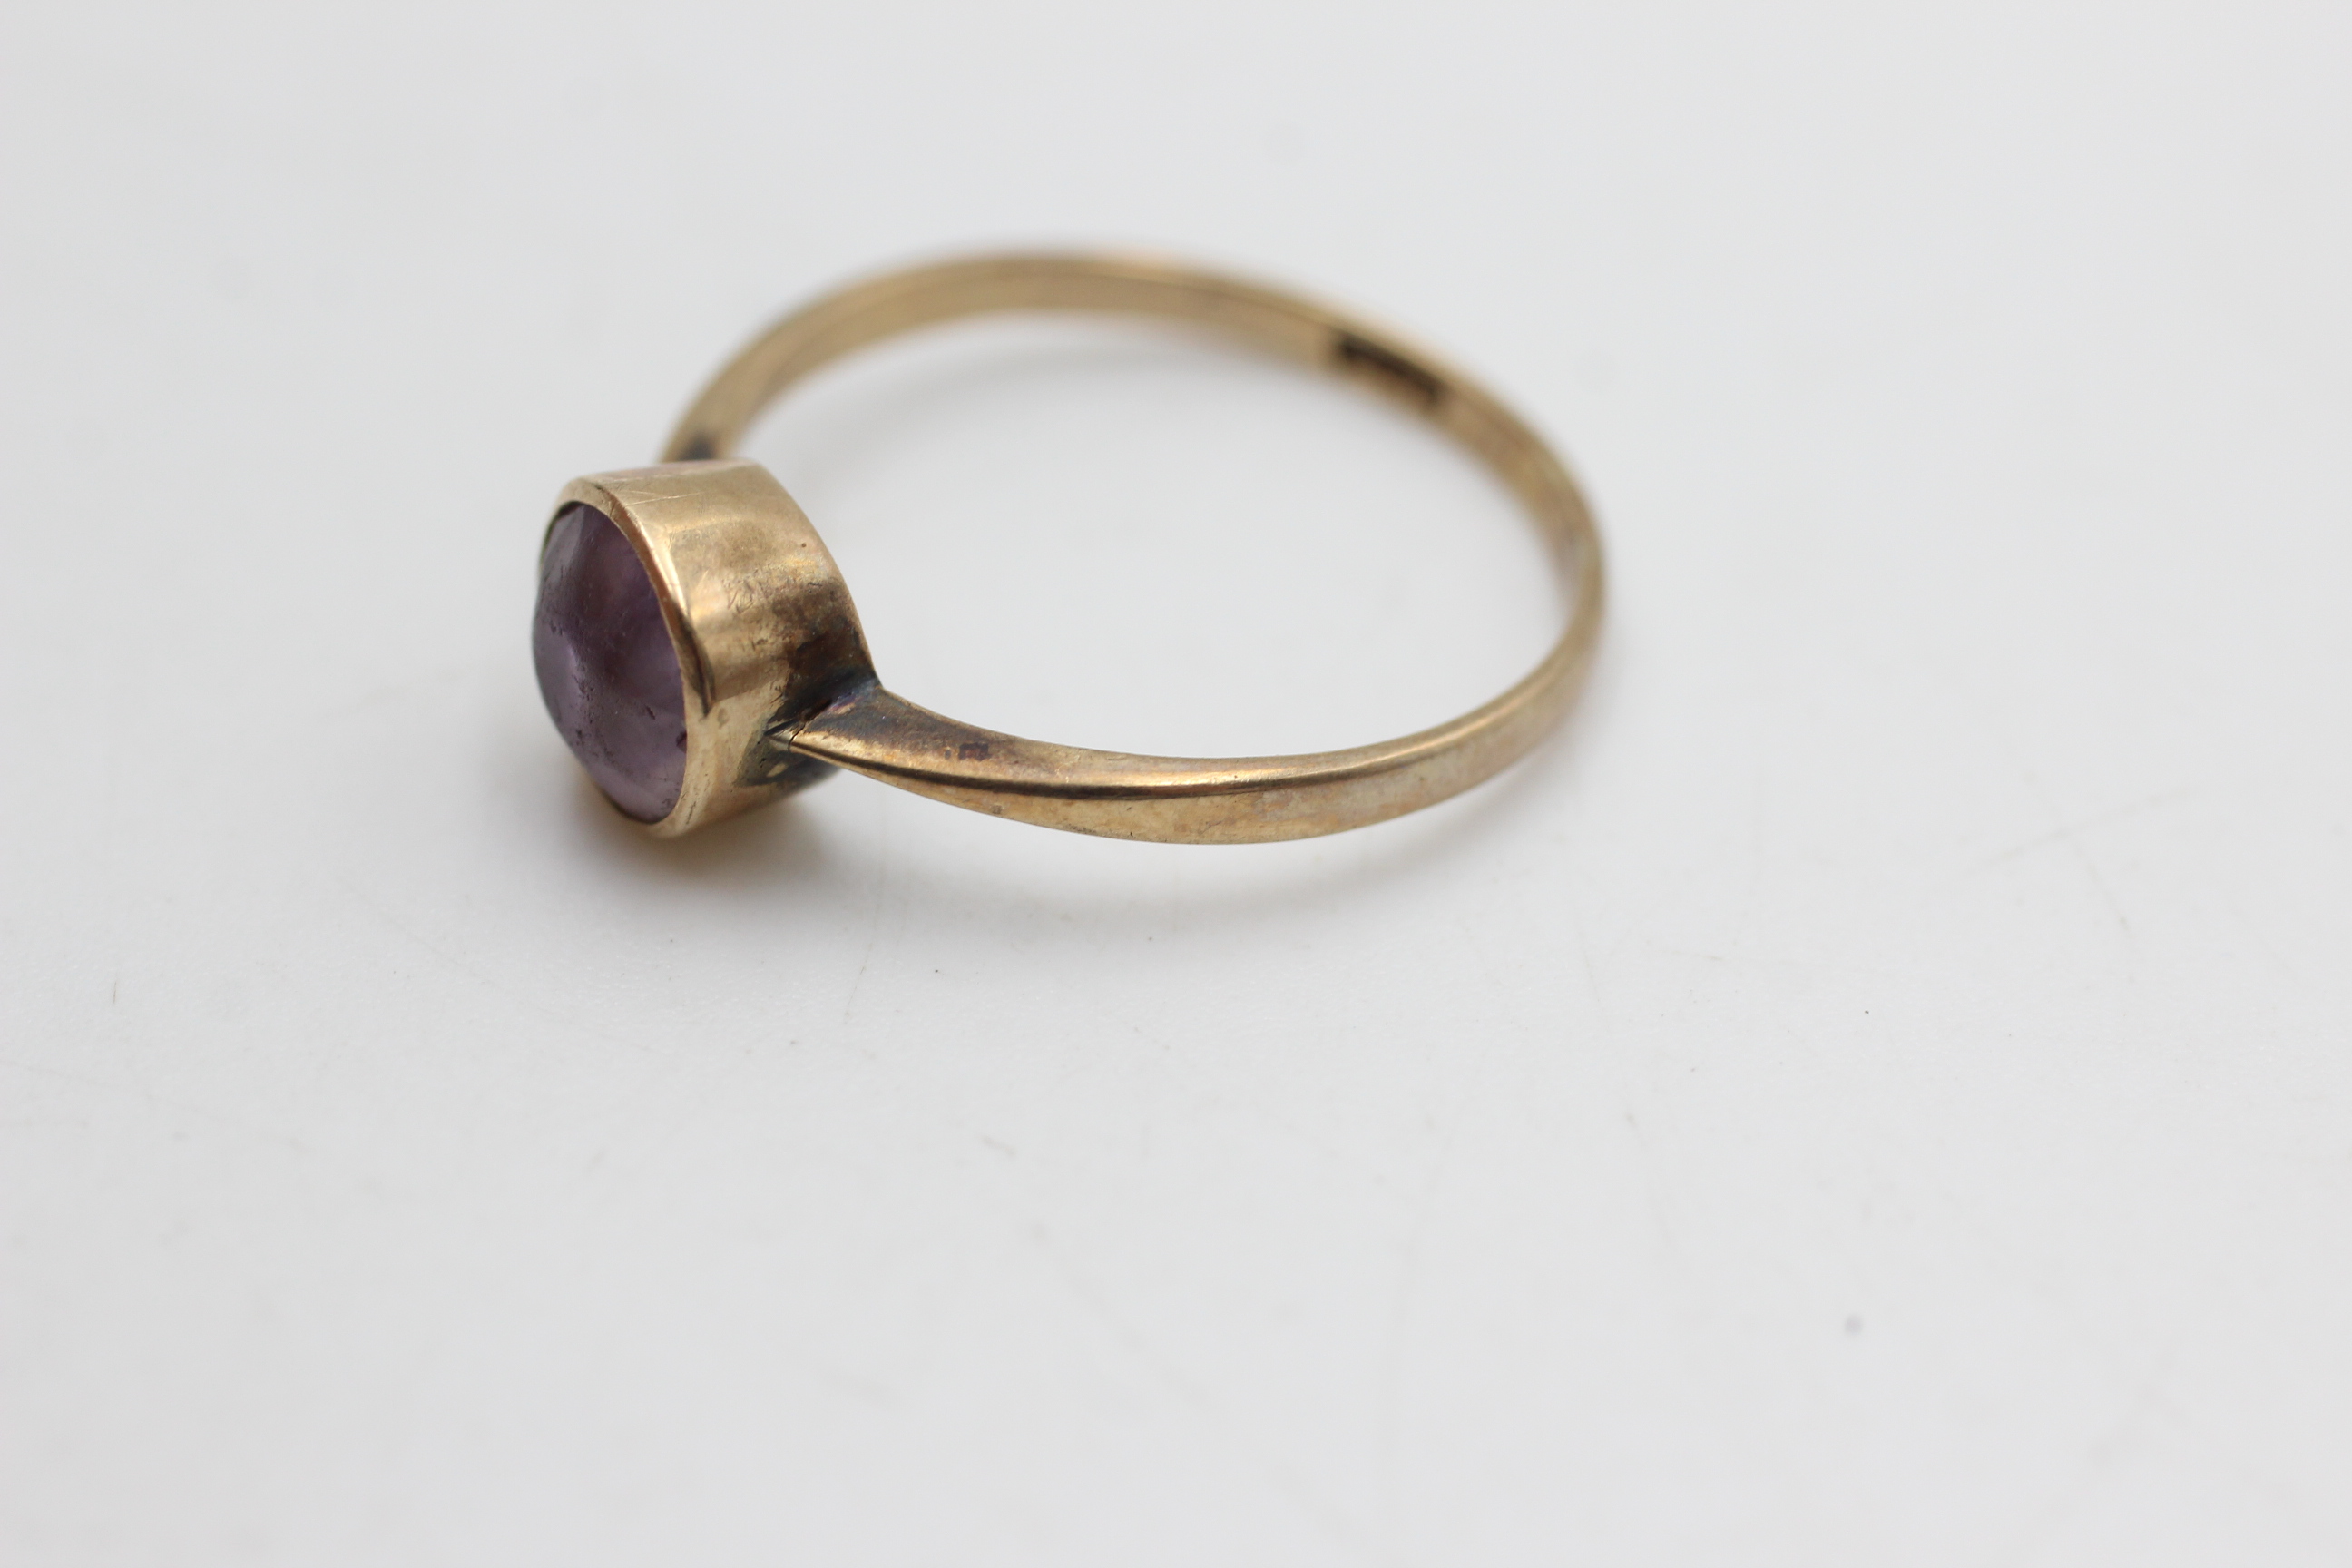 9ct gold antique amethyst ring (1.8g) - Image 3 of 4